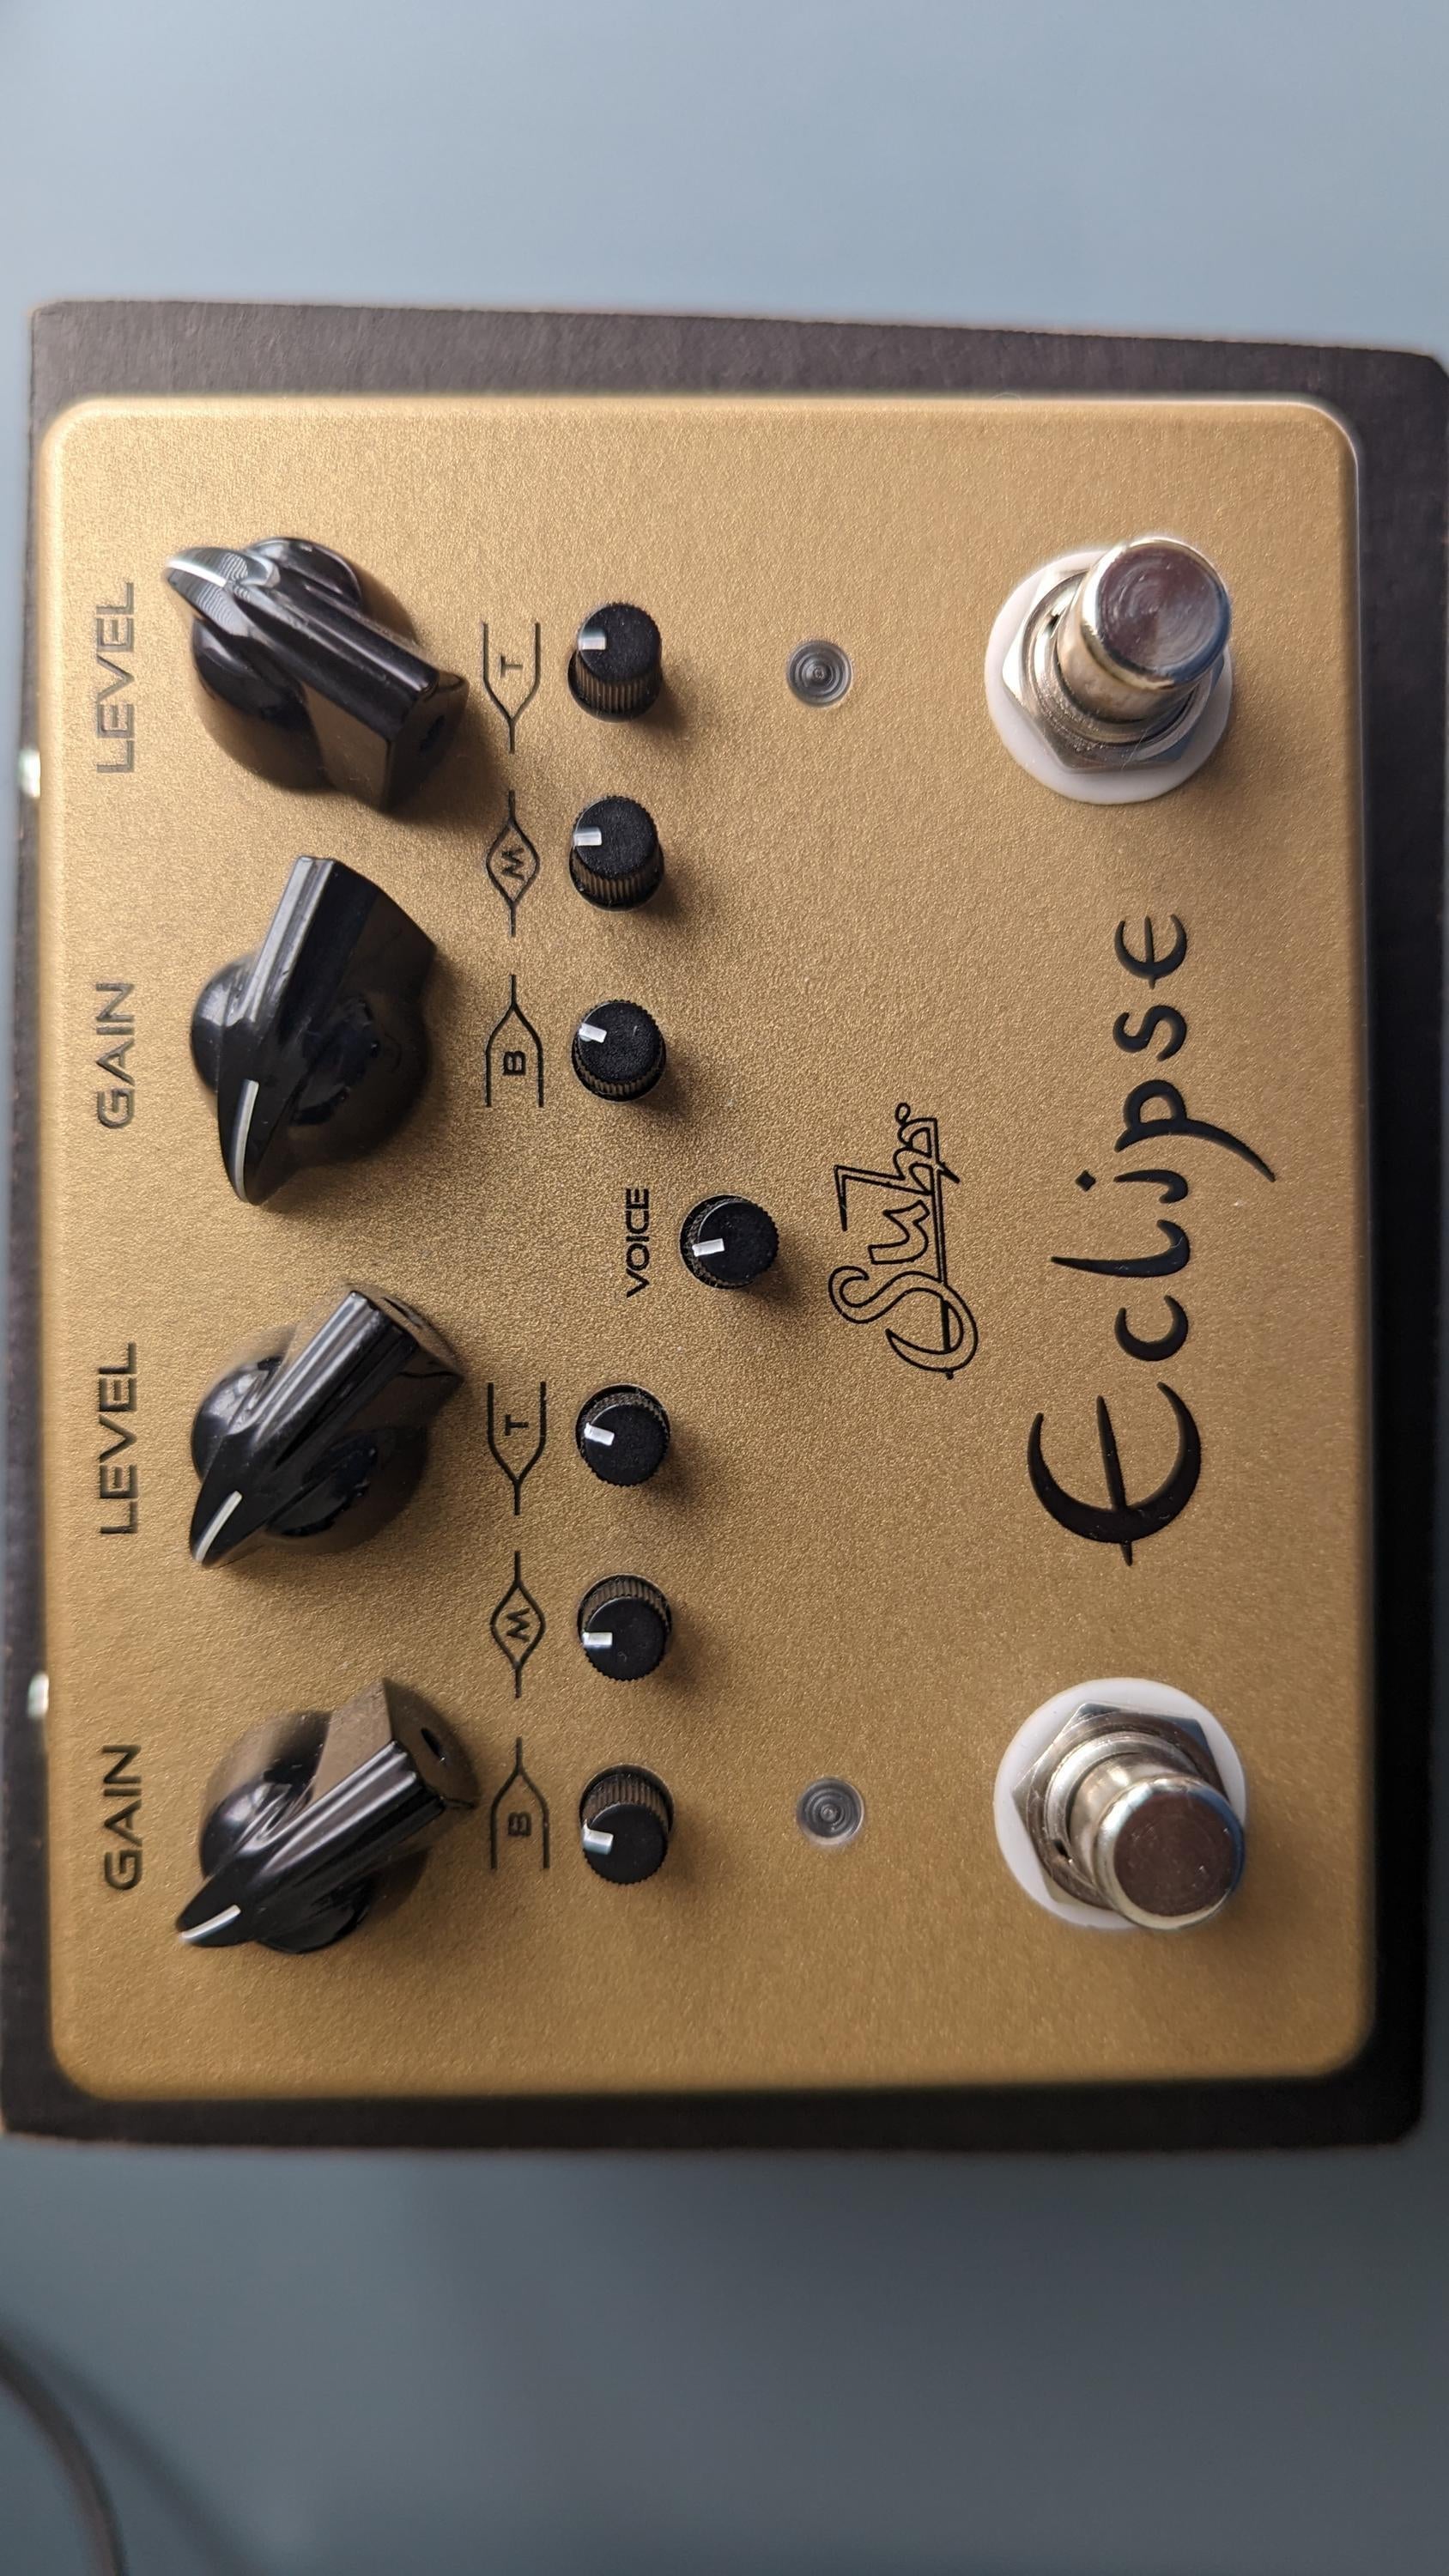 Used Suhr Eclipse Overdrive/Distortion - Sweetwater's Gear Exchange